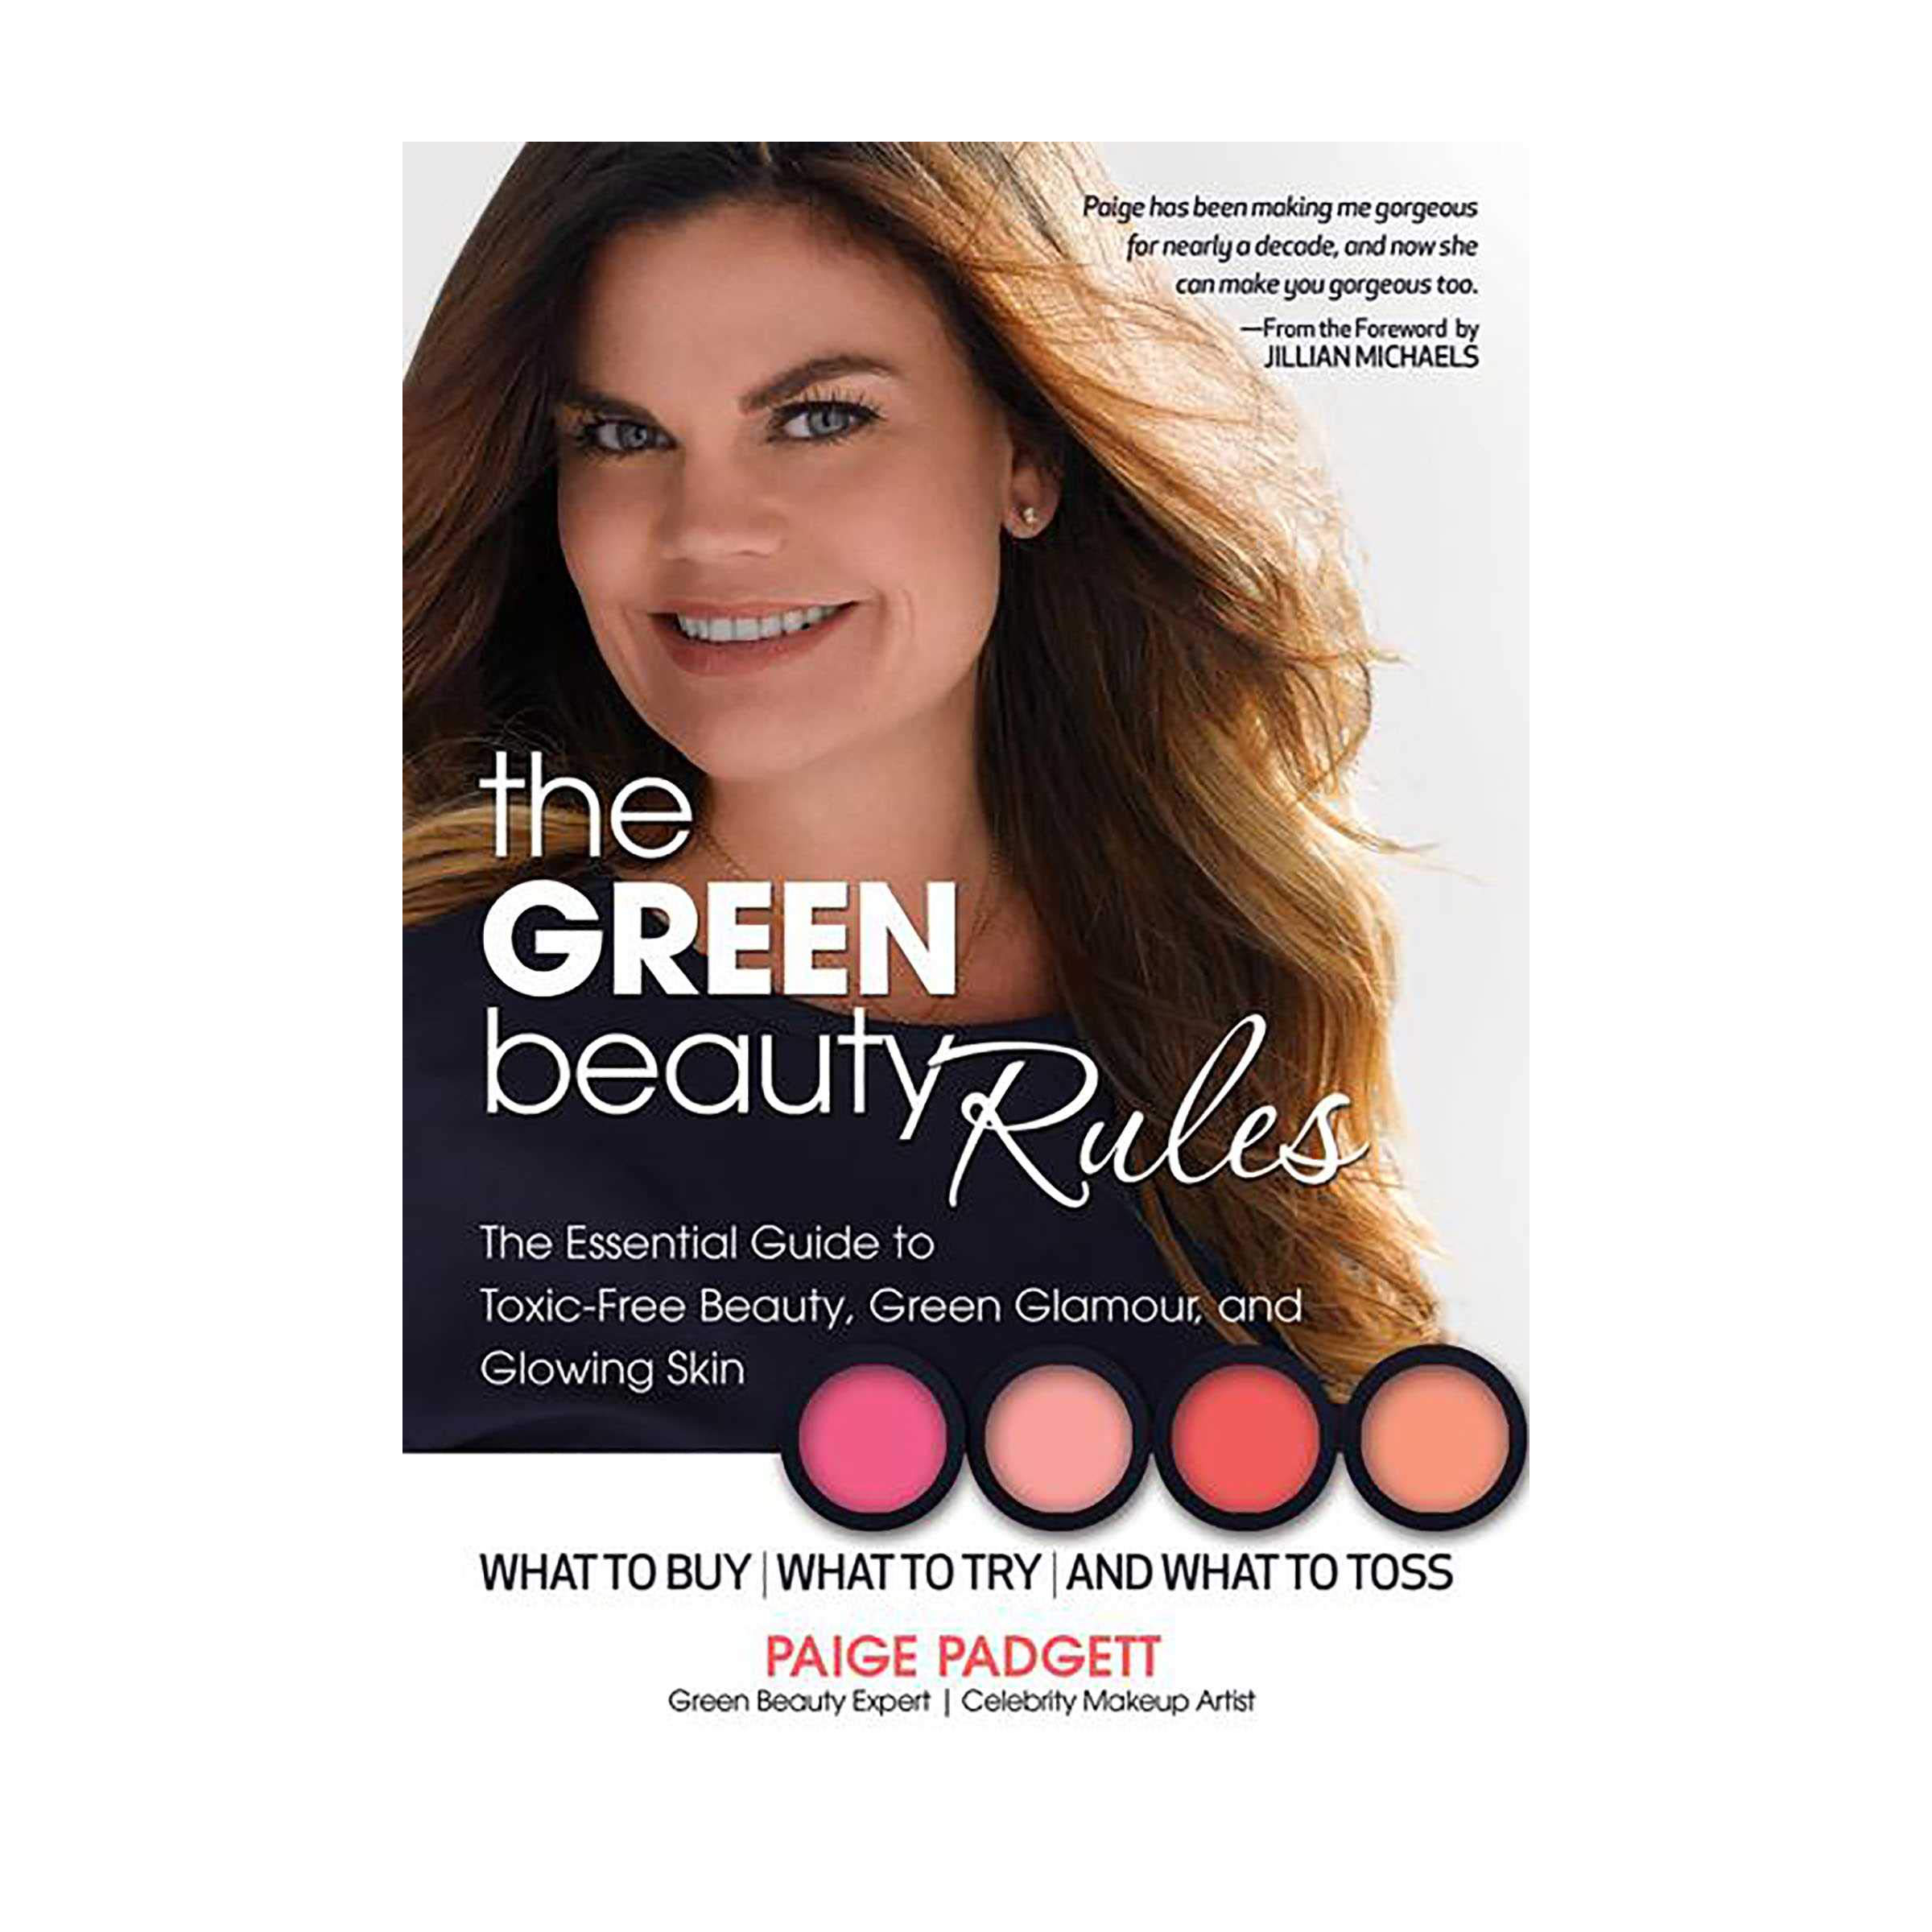 Read The Green Beauty Rules by Paige Padgett to transition to toxic free beauty.